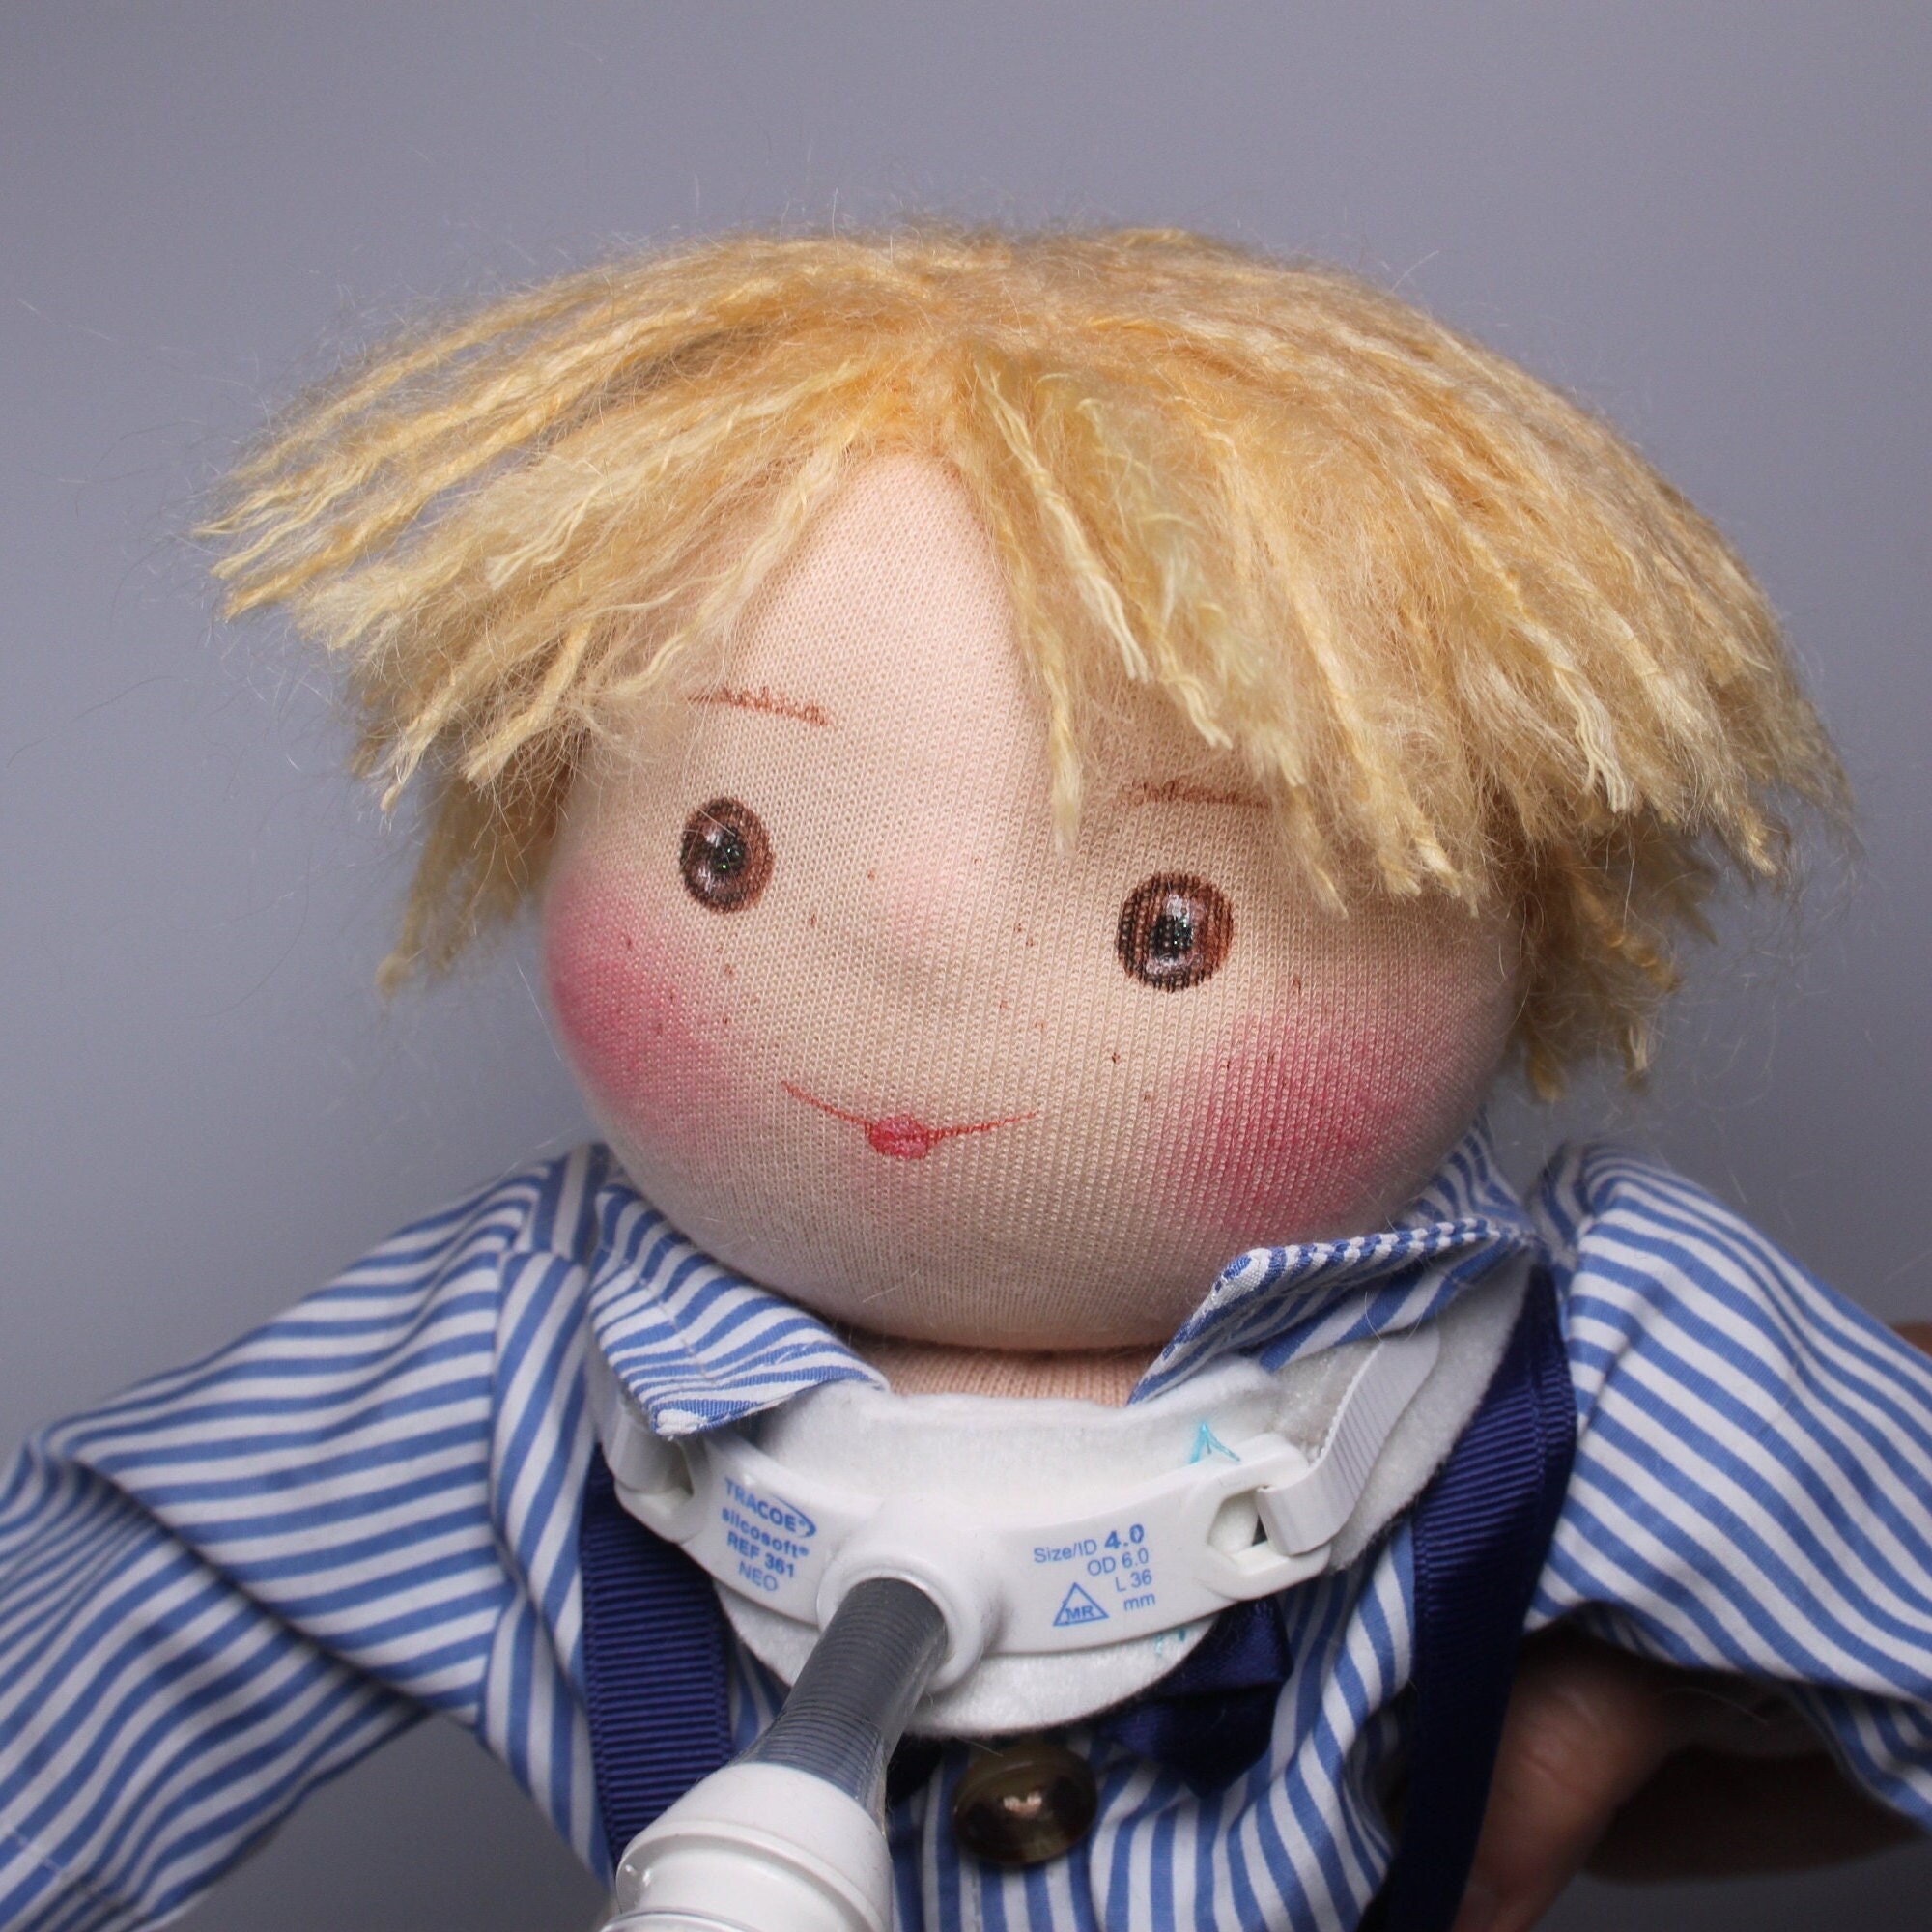 Doll with Hair - Makeup Doll Head for Girls,Plush Doll Long Hair with Pop  Eyes, Cotton Stuffed Hair Styling Doll Snug Cuddle Bedtime Buddy for Boys